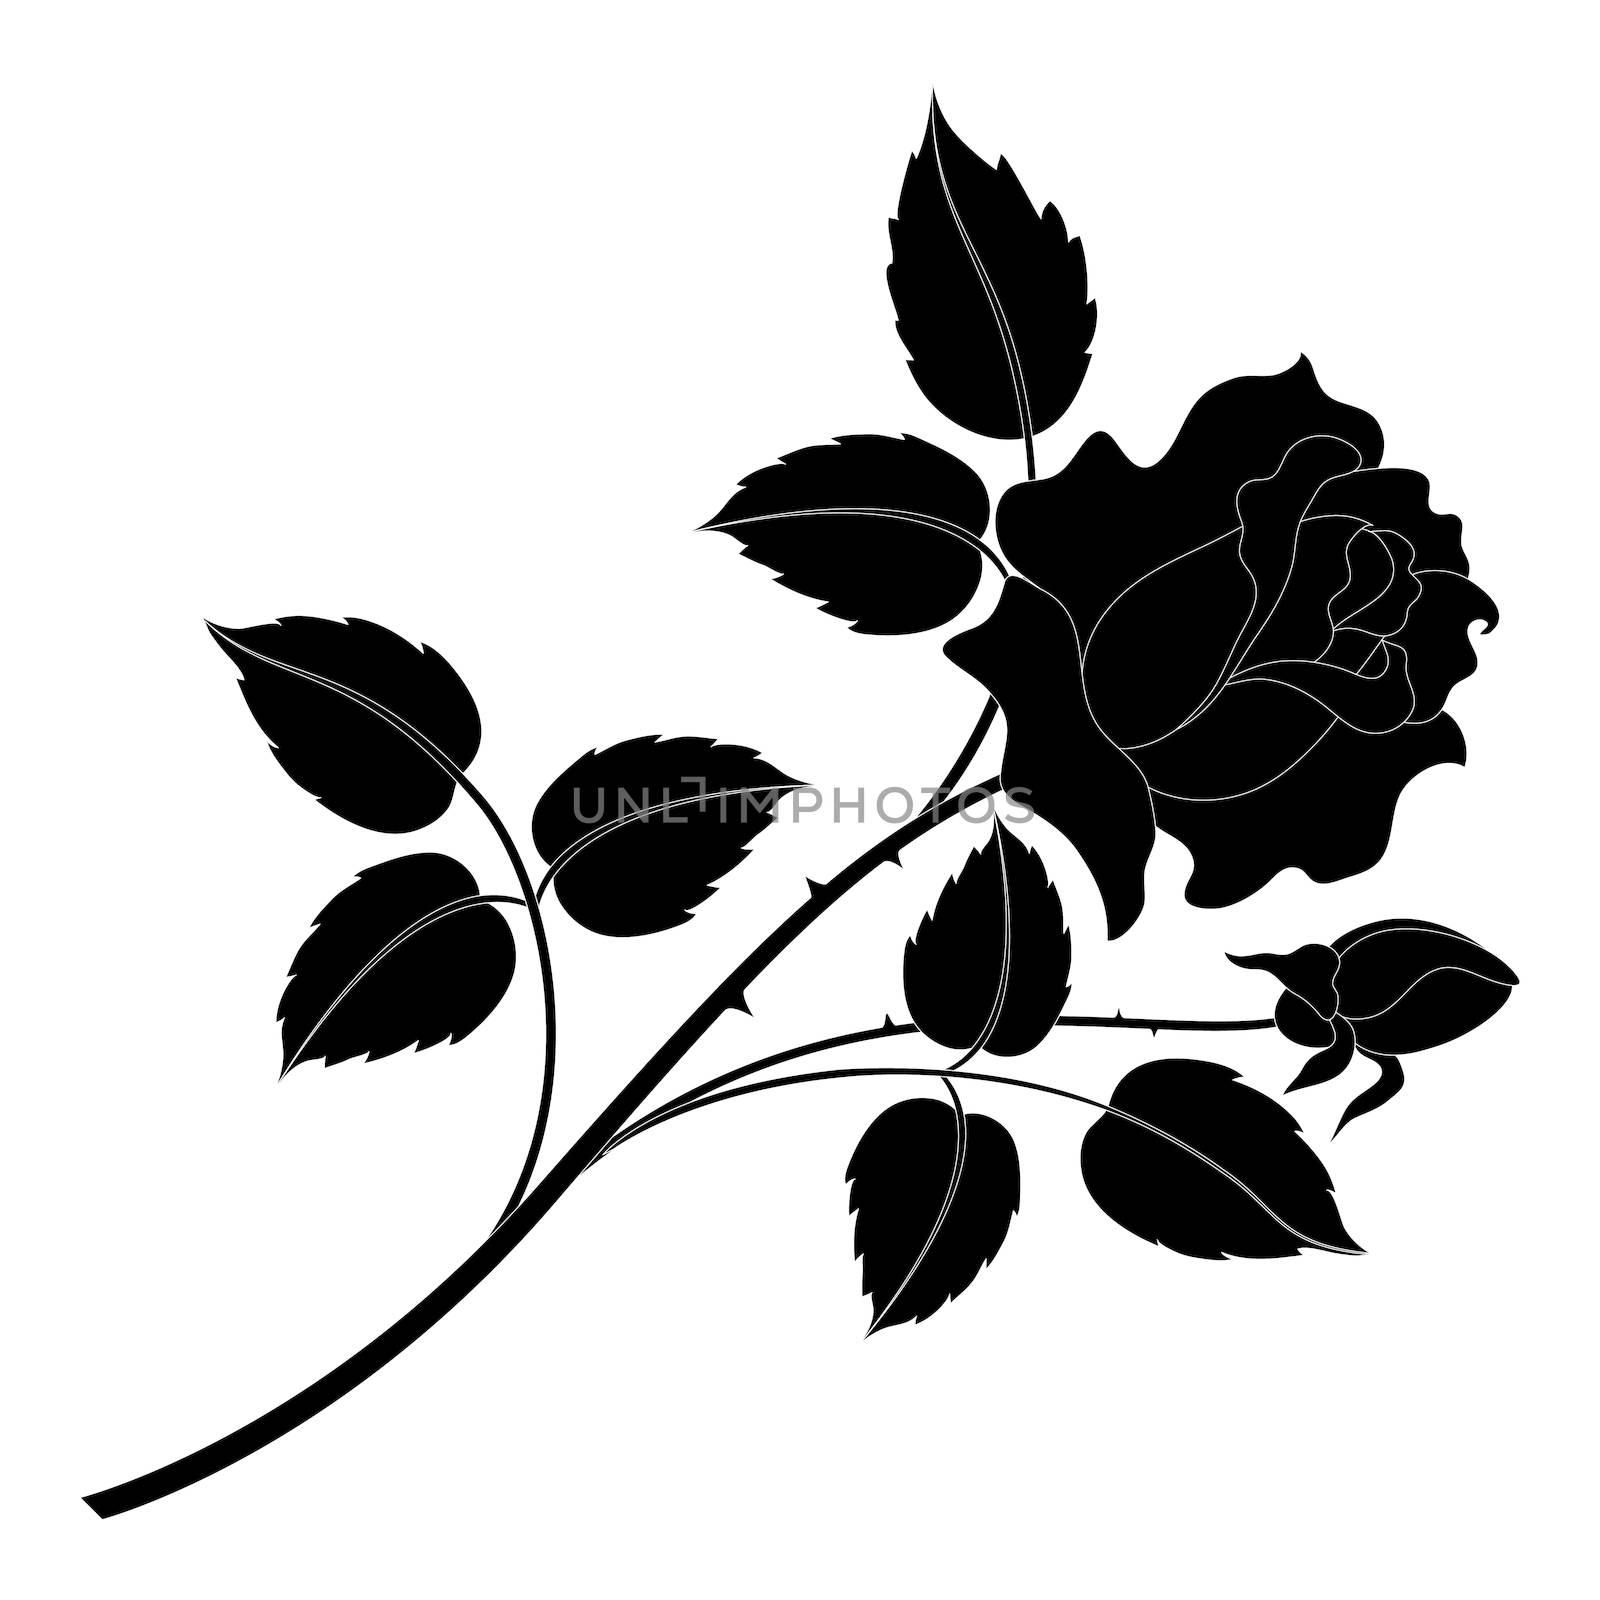 Flower rose, petals and leaves black silhouettes isolated on white background.